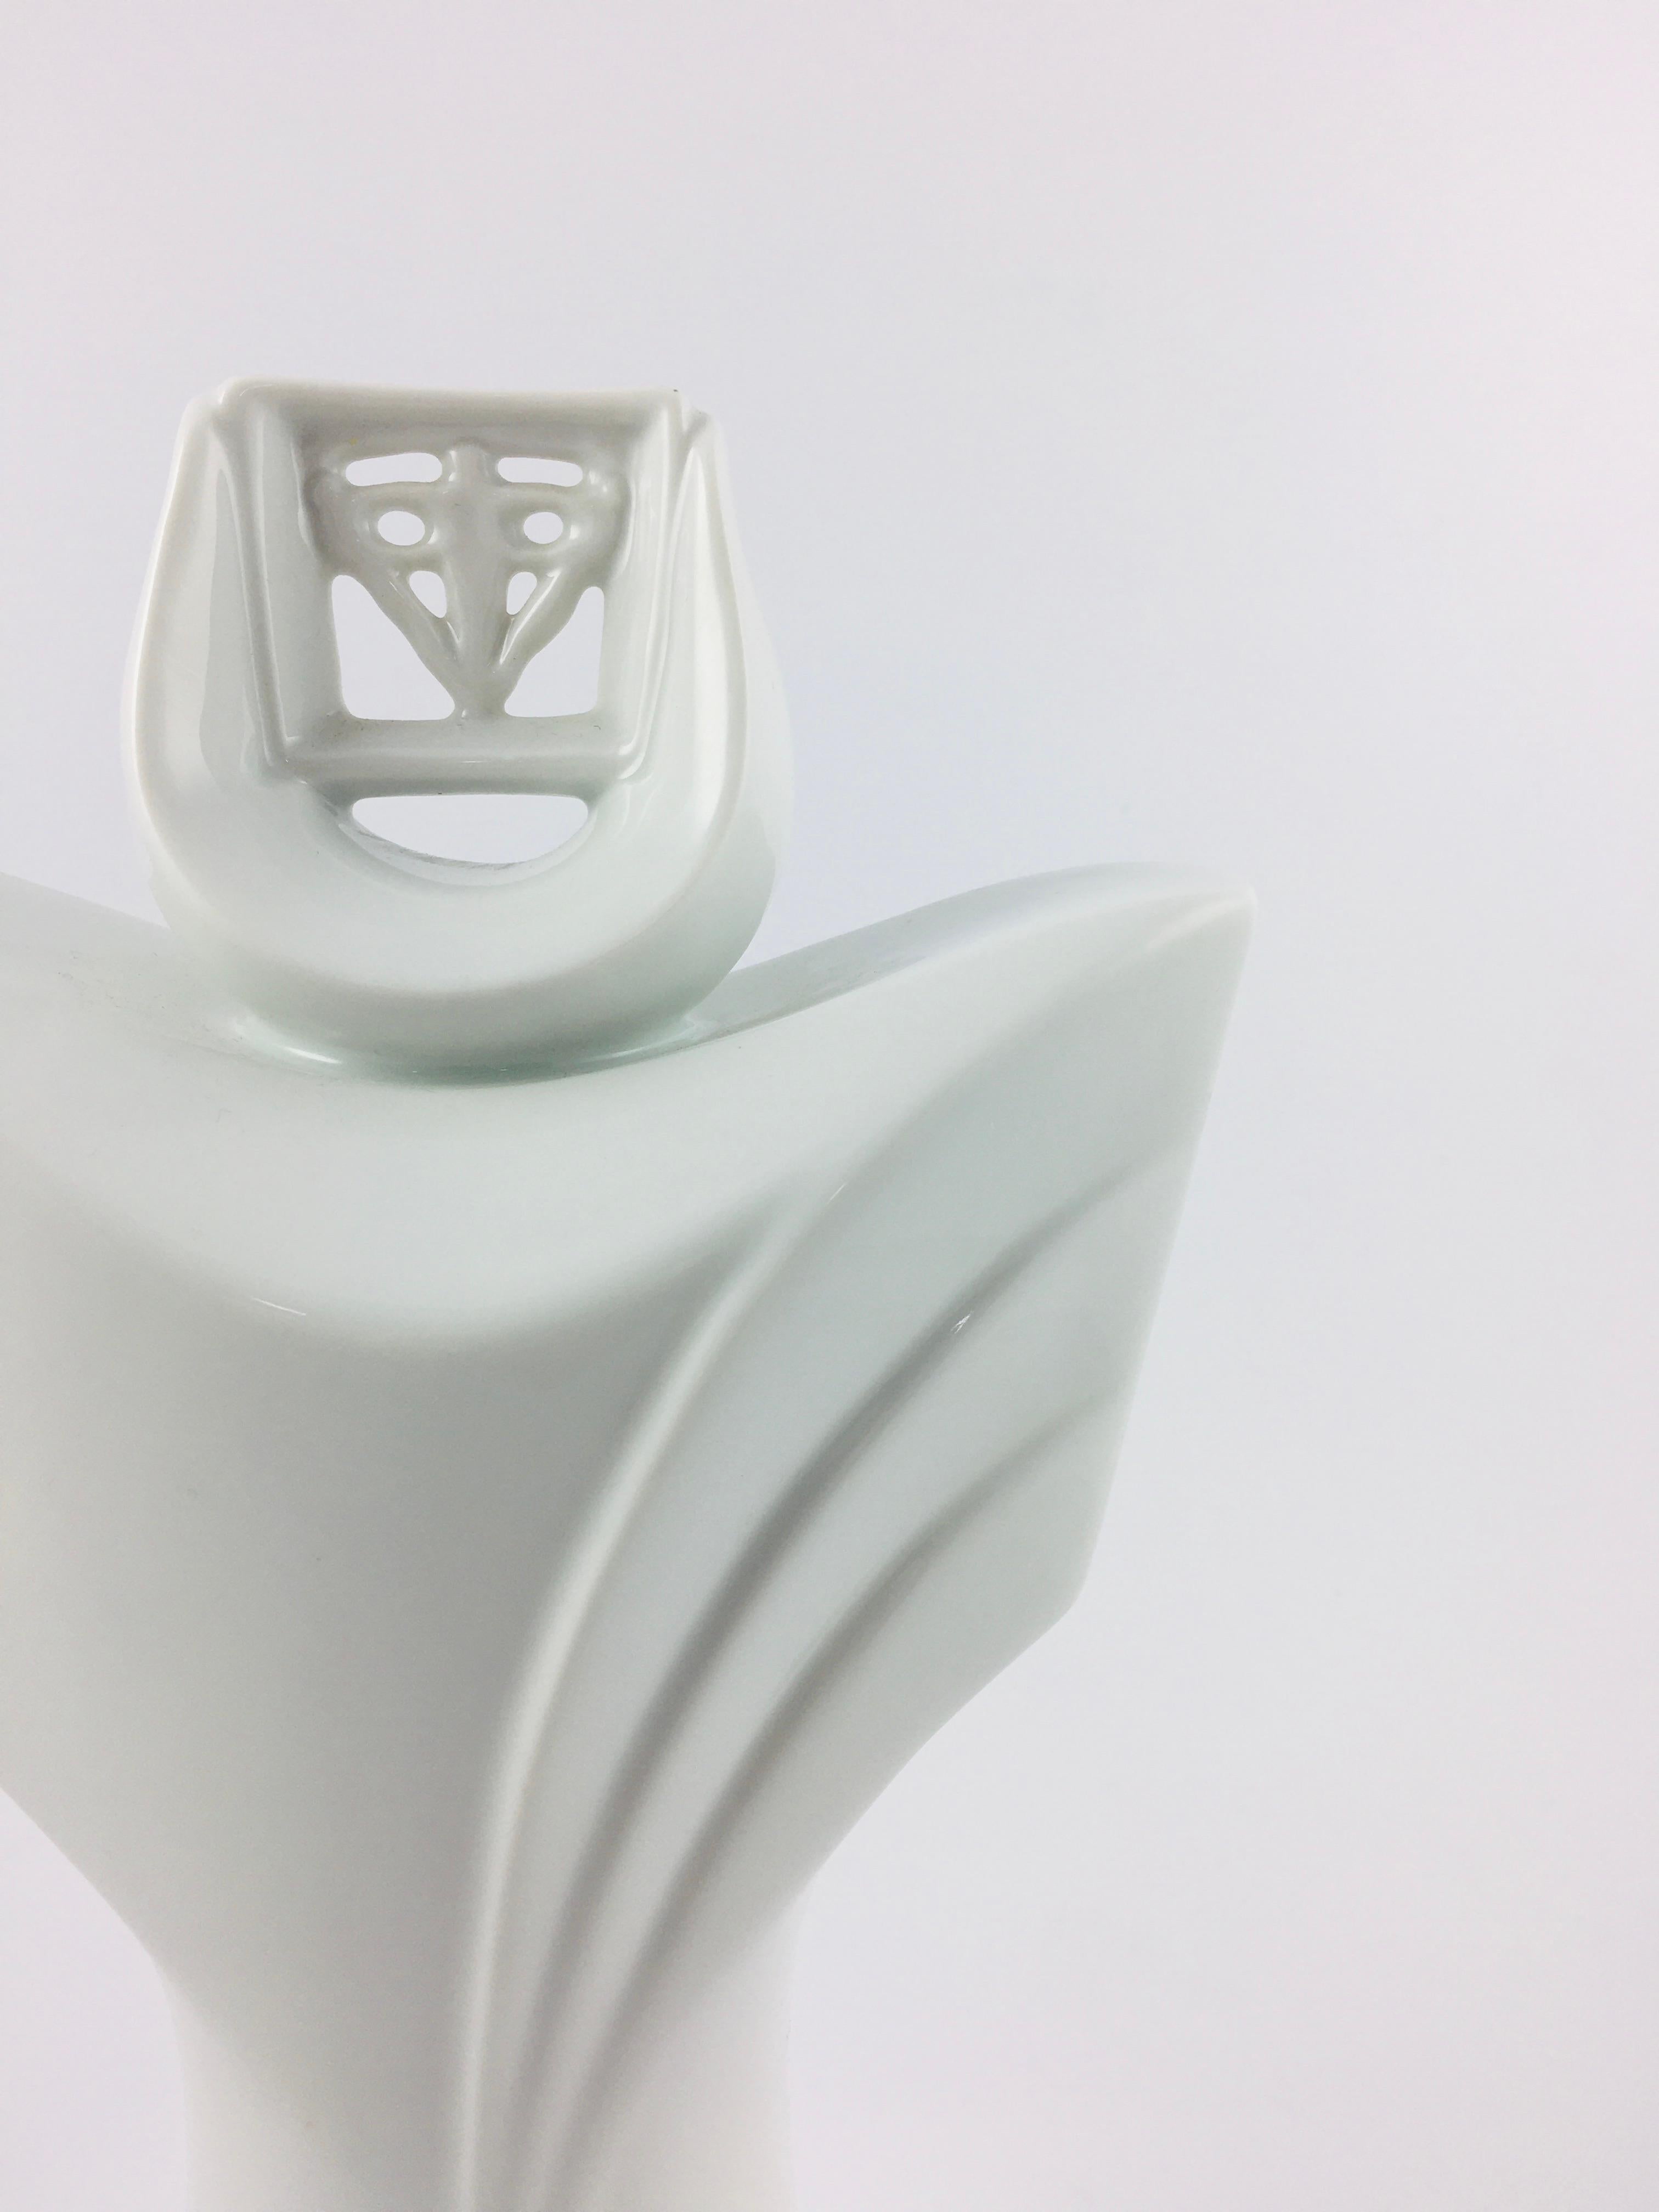 Hungarian Modern Abstract White Porcelain Figure from Hungary, 1960s For Sale